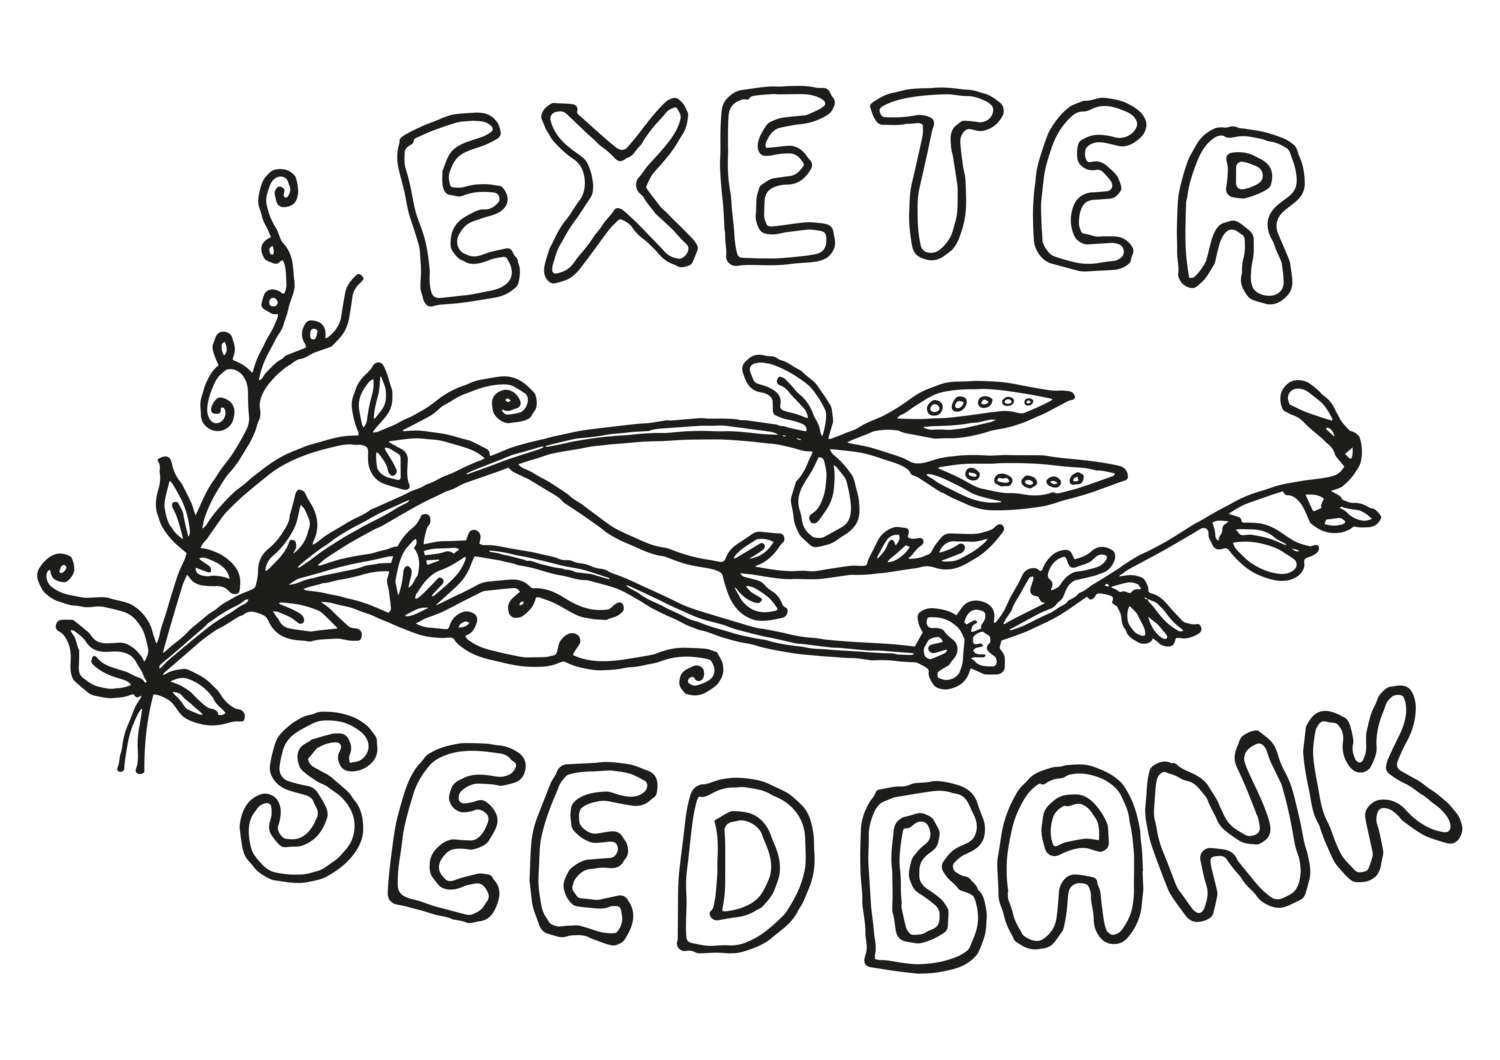 Exeter Seed Bank